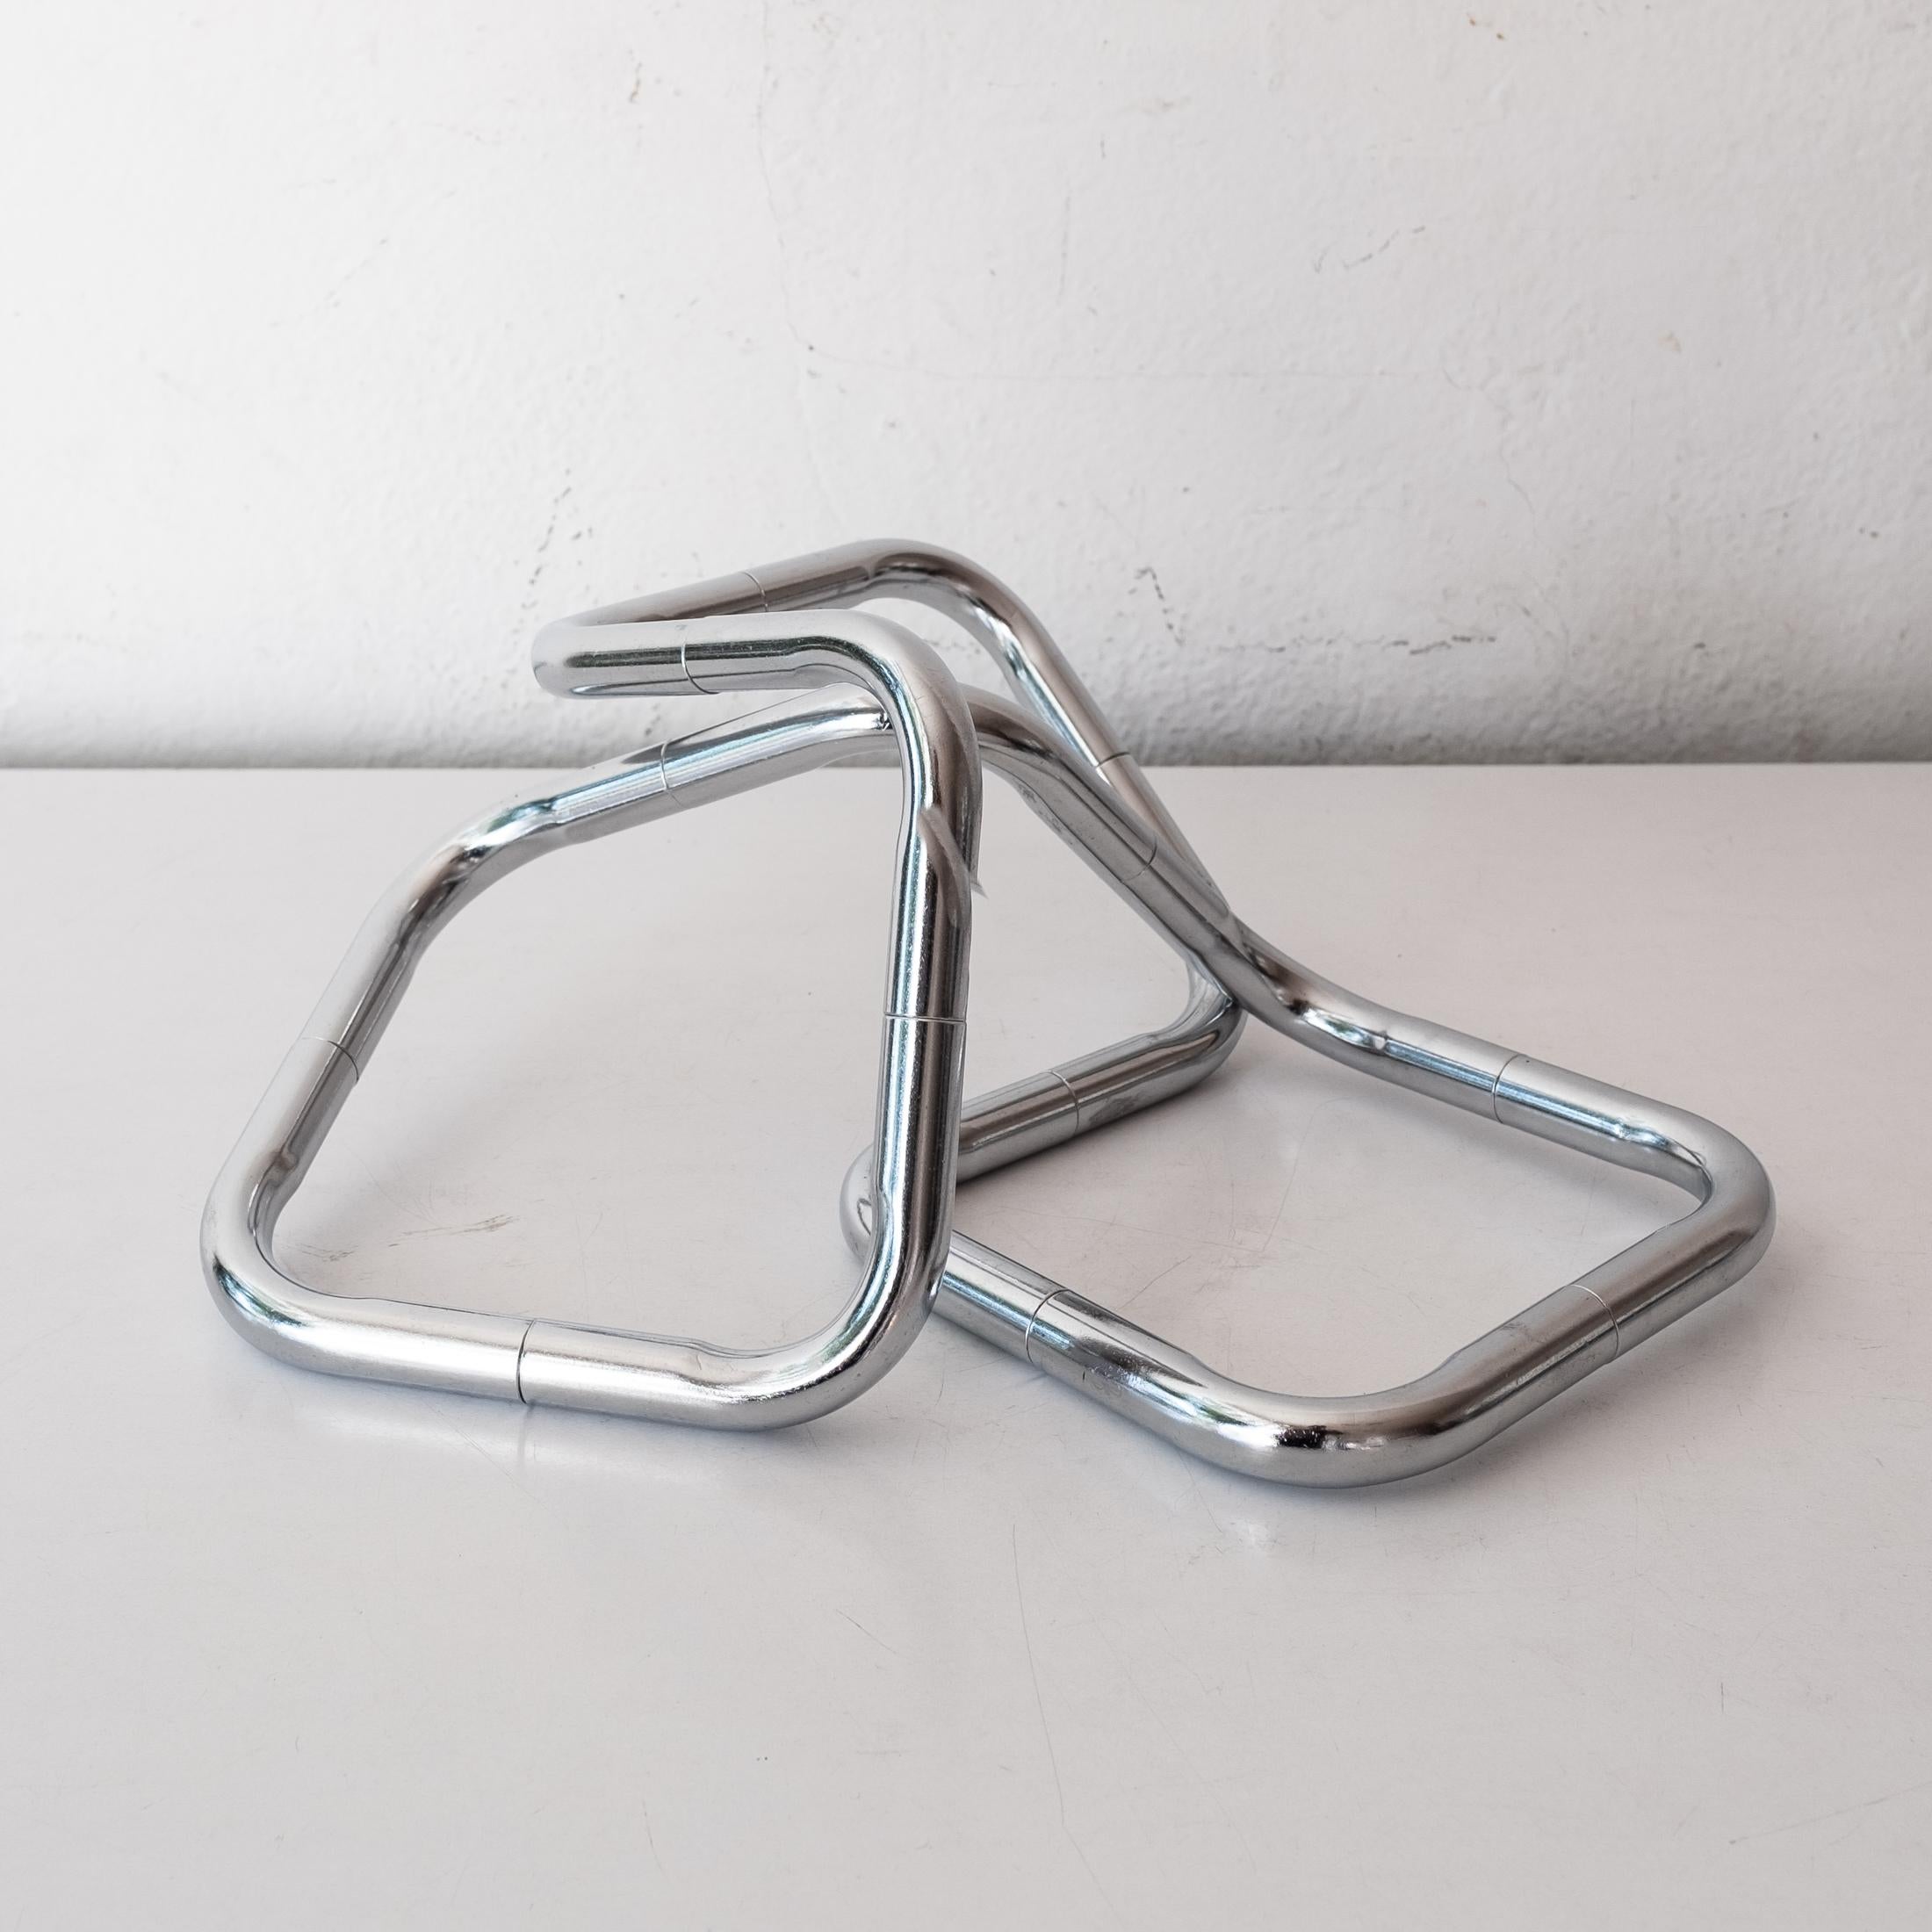 Modernist Metal Tangle Abstract Kinetic Sculpture 9